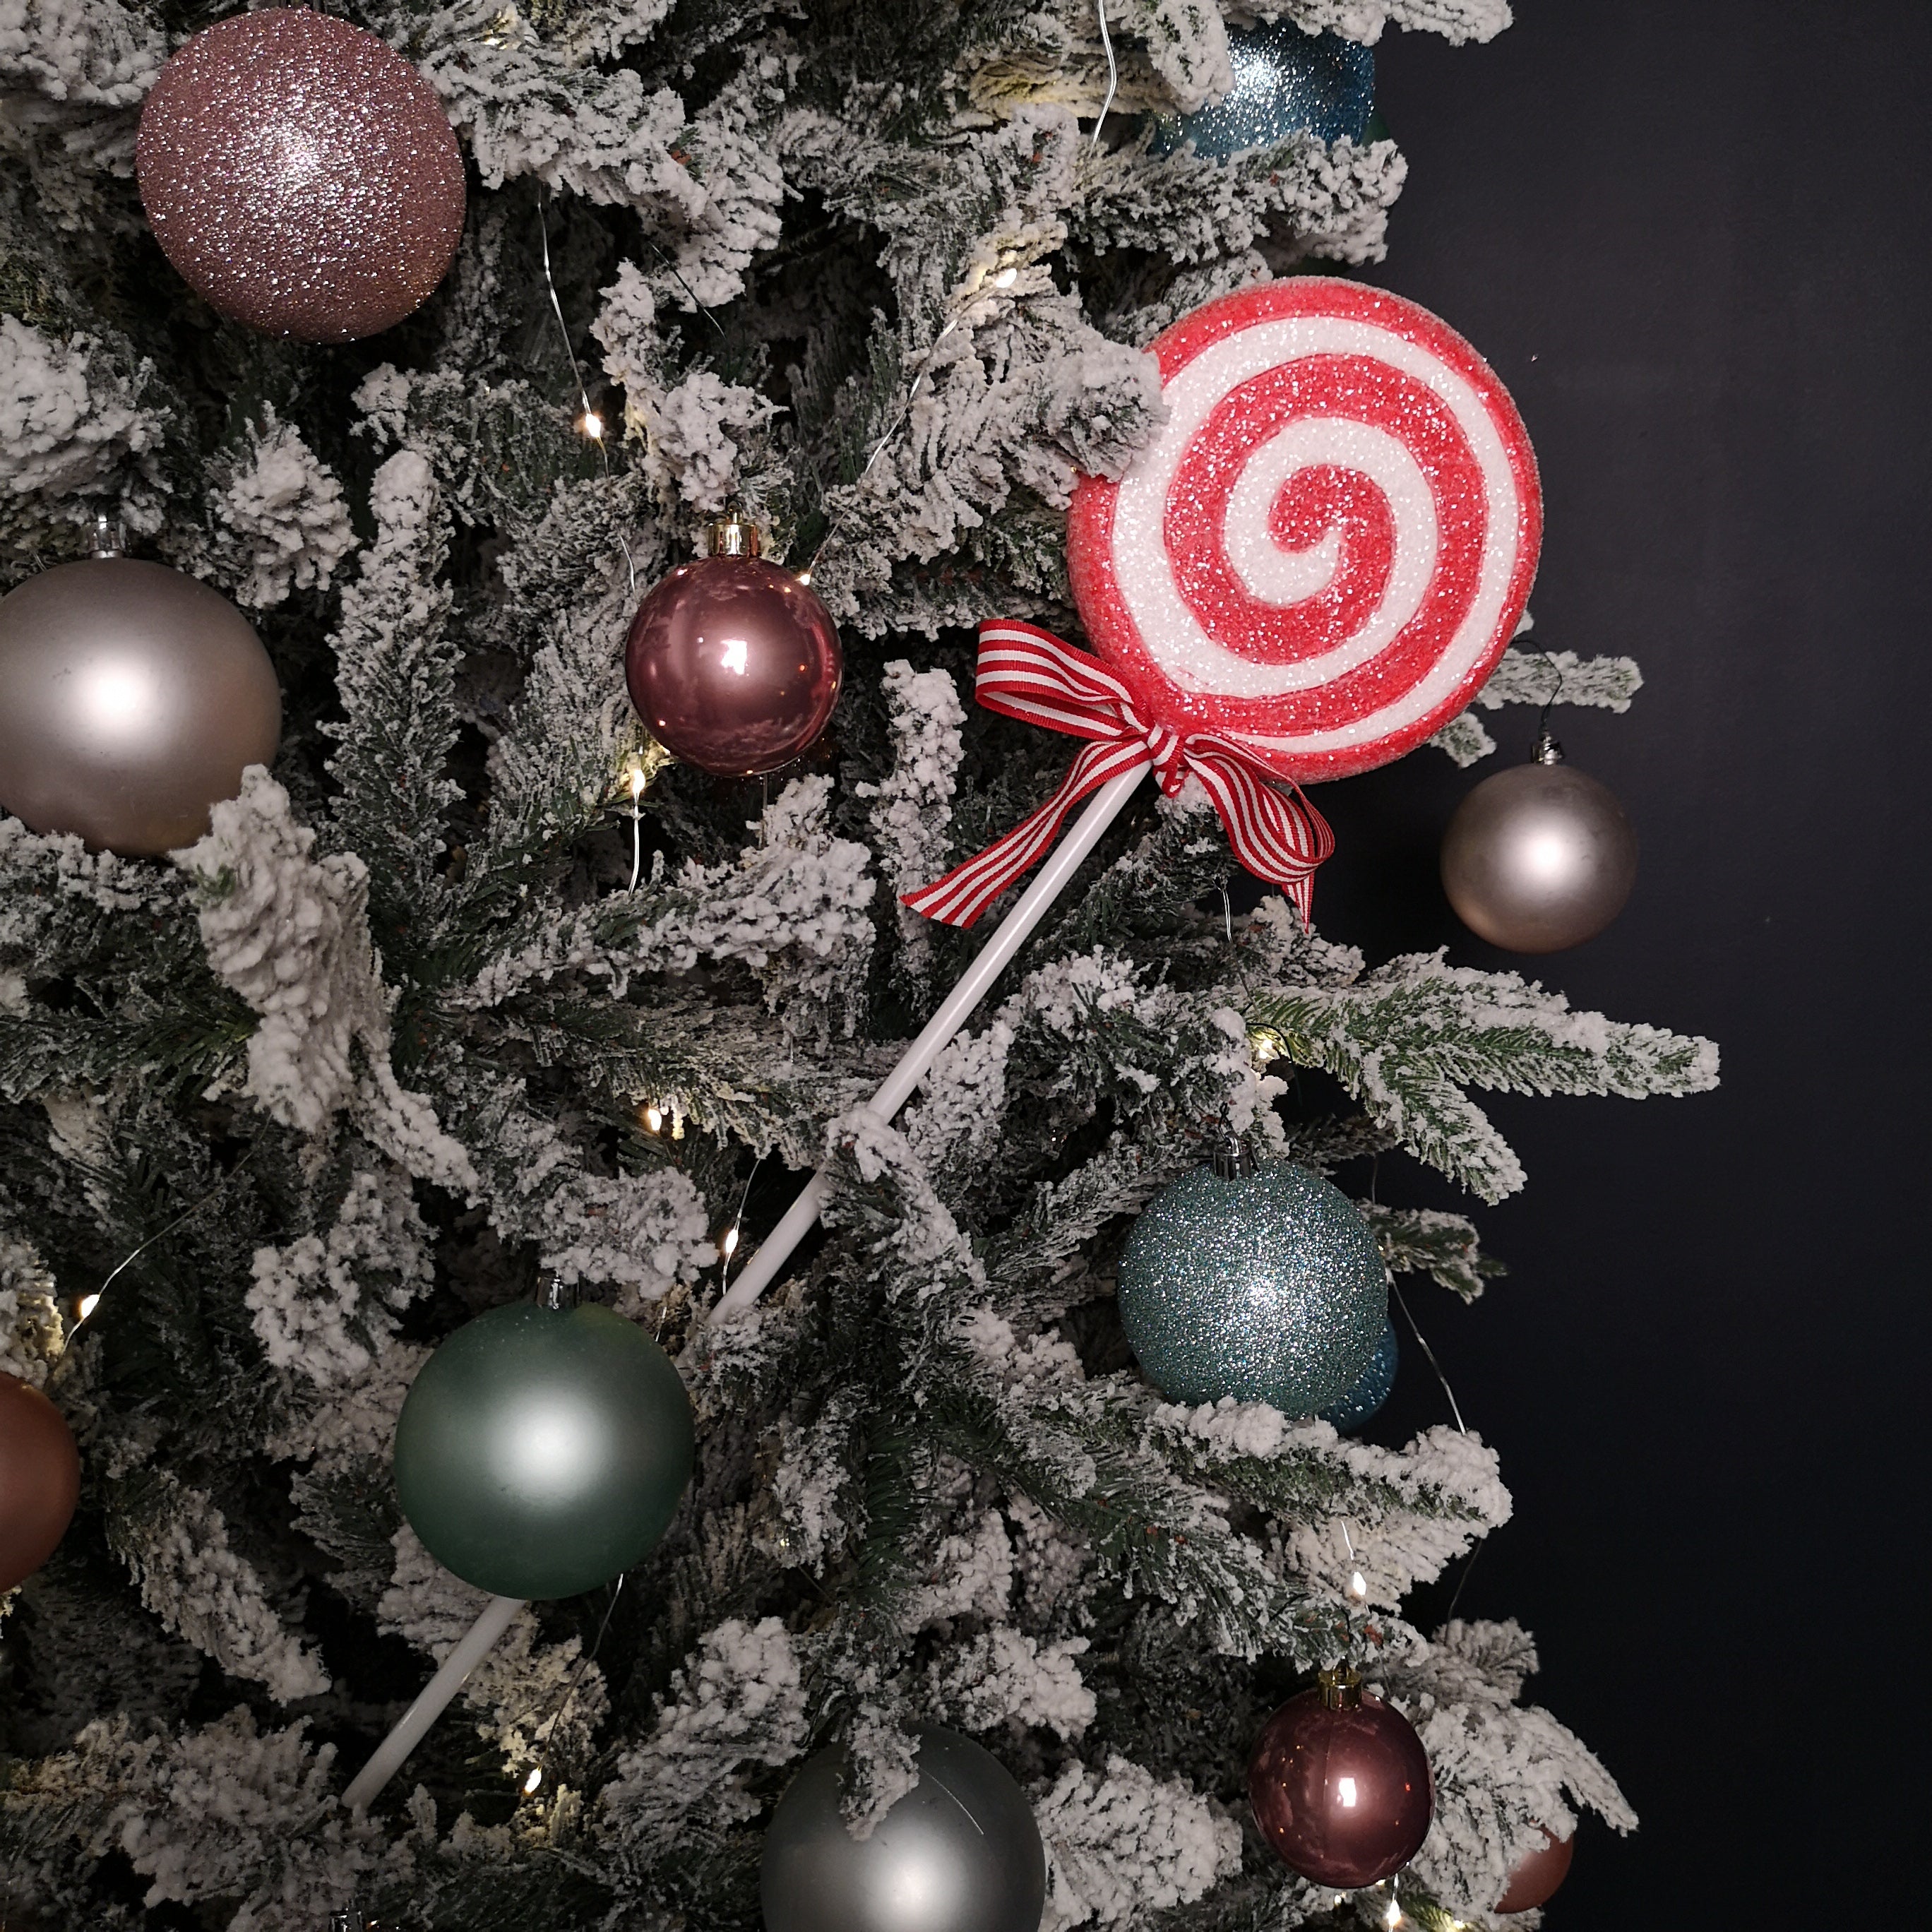 54cm Red and White Spiral Candy Cane Lollipop Christmas Decoration with Stem